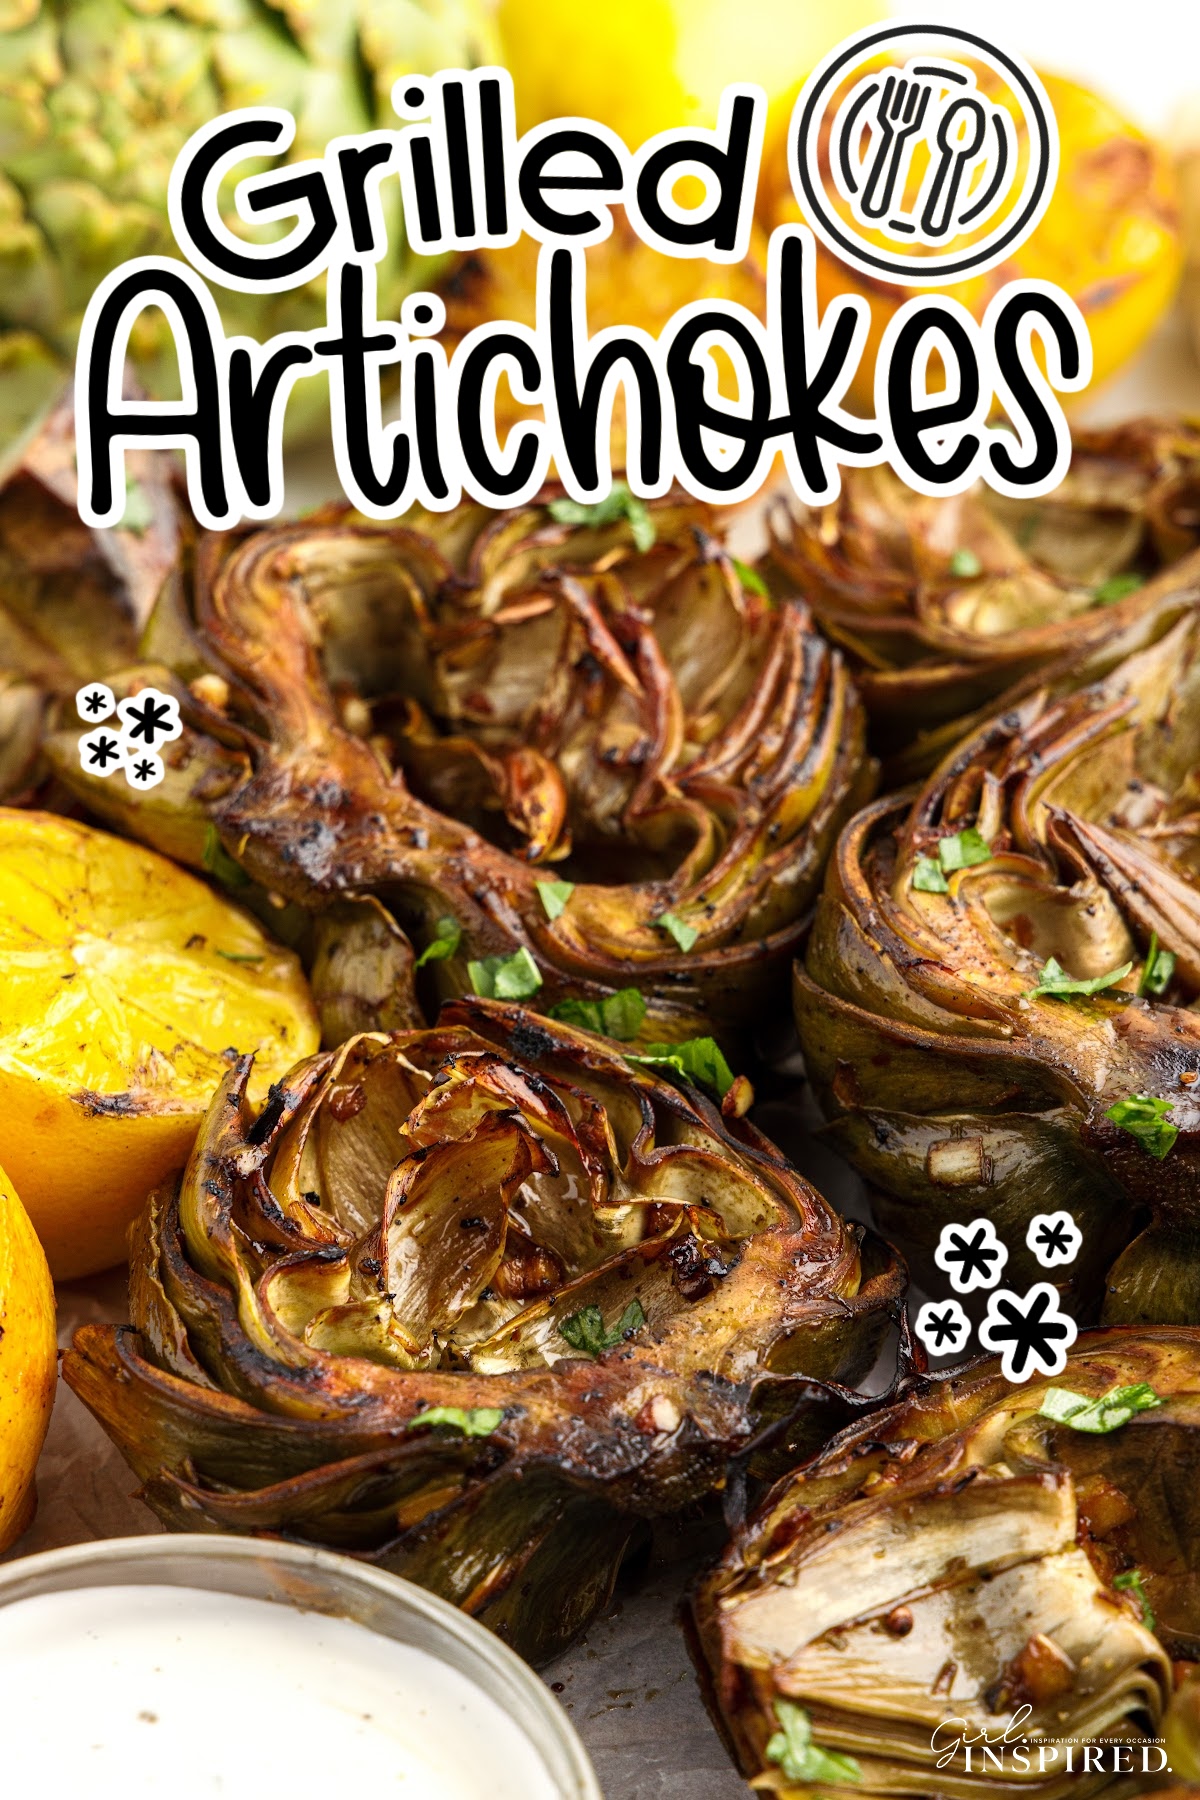 Grilled Artichokes with text overlay.